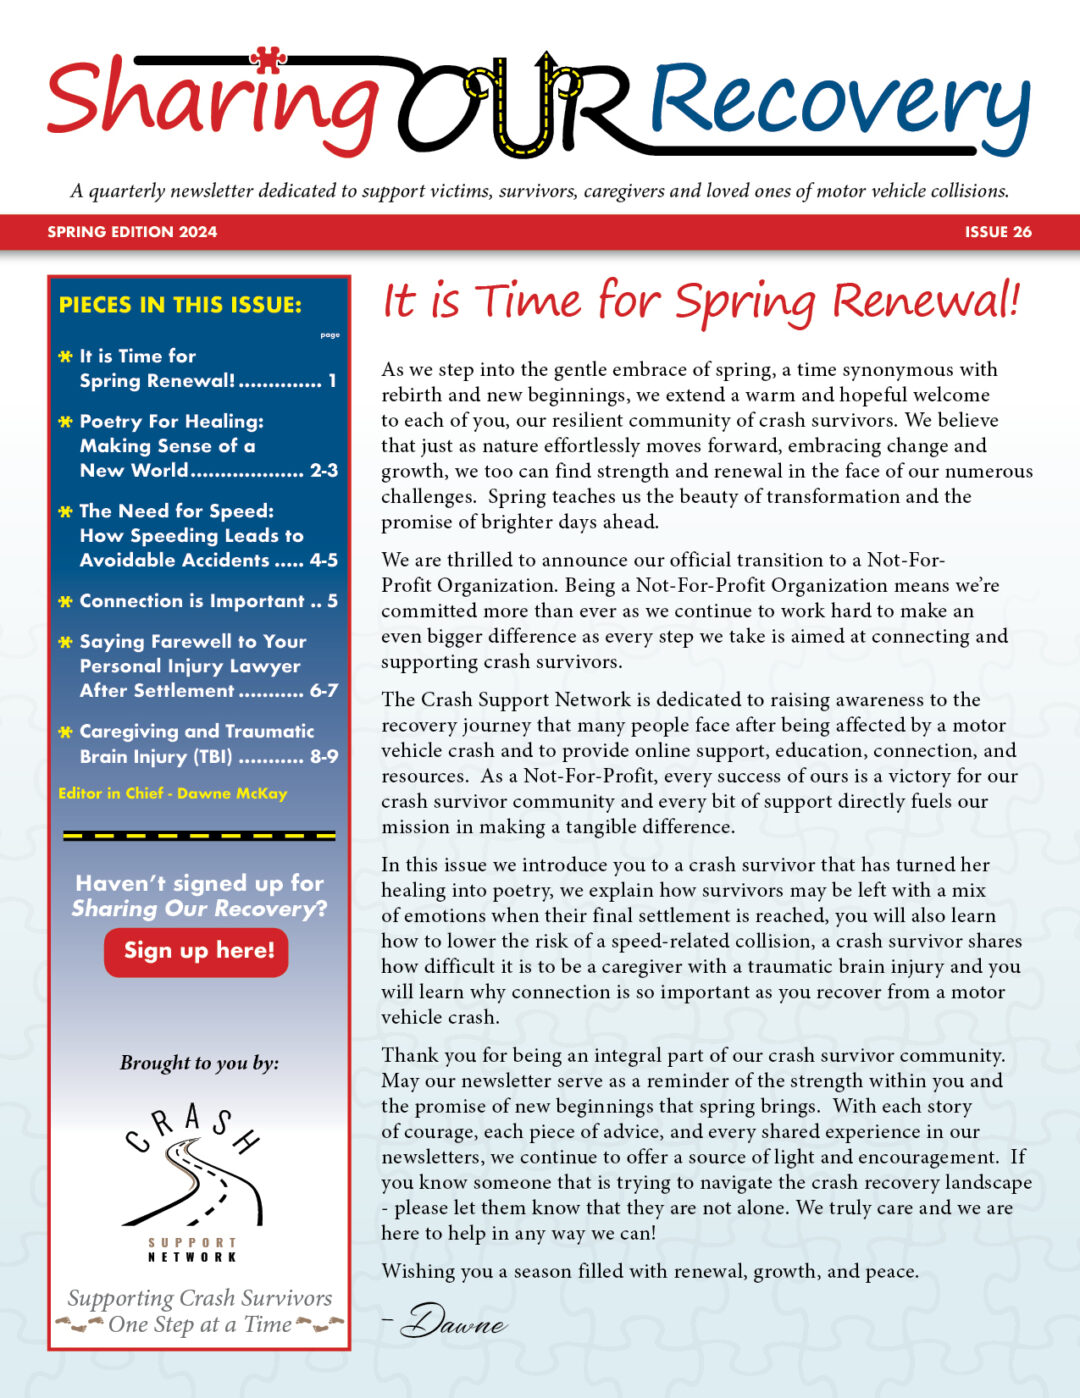 Sharing Our Recovery Spring 2024 issue